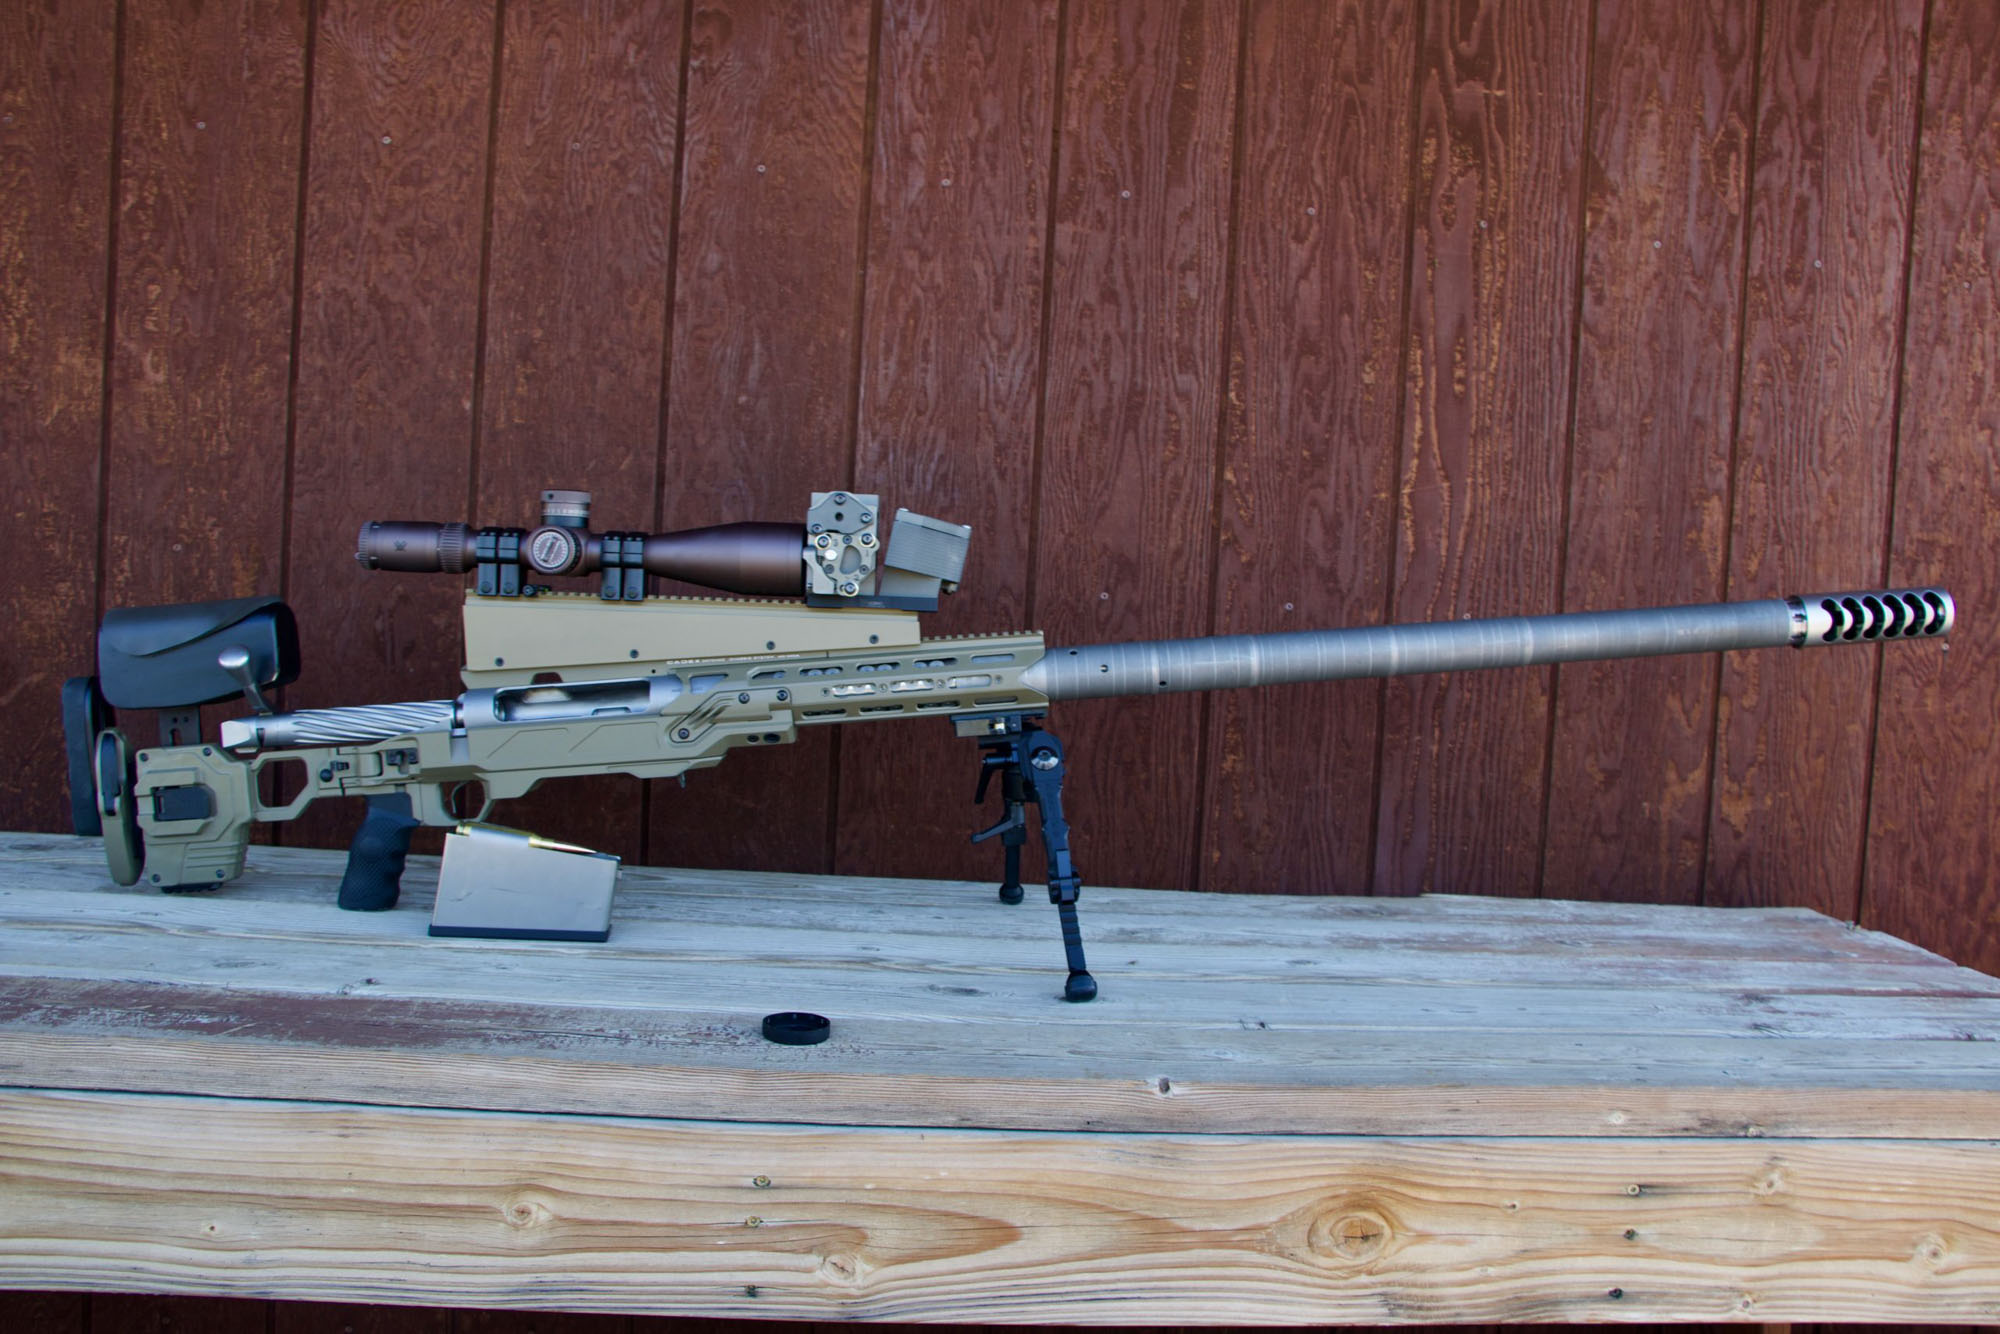 https://www.outdoorlife.com/wp-content/uploads/2022/09/20/Nomad-Rifleman-Rifle-used-in-world-record-shot-52-scaled-1.jpeg